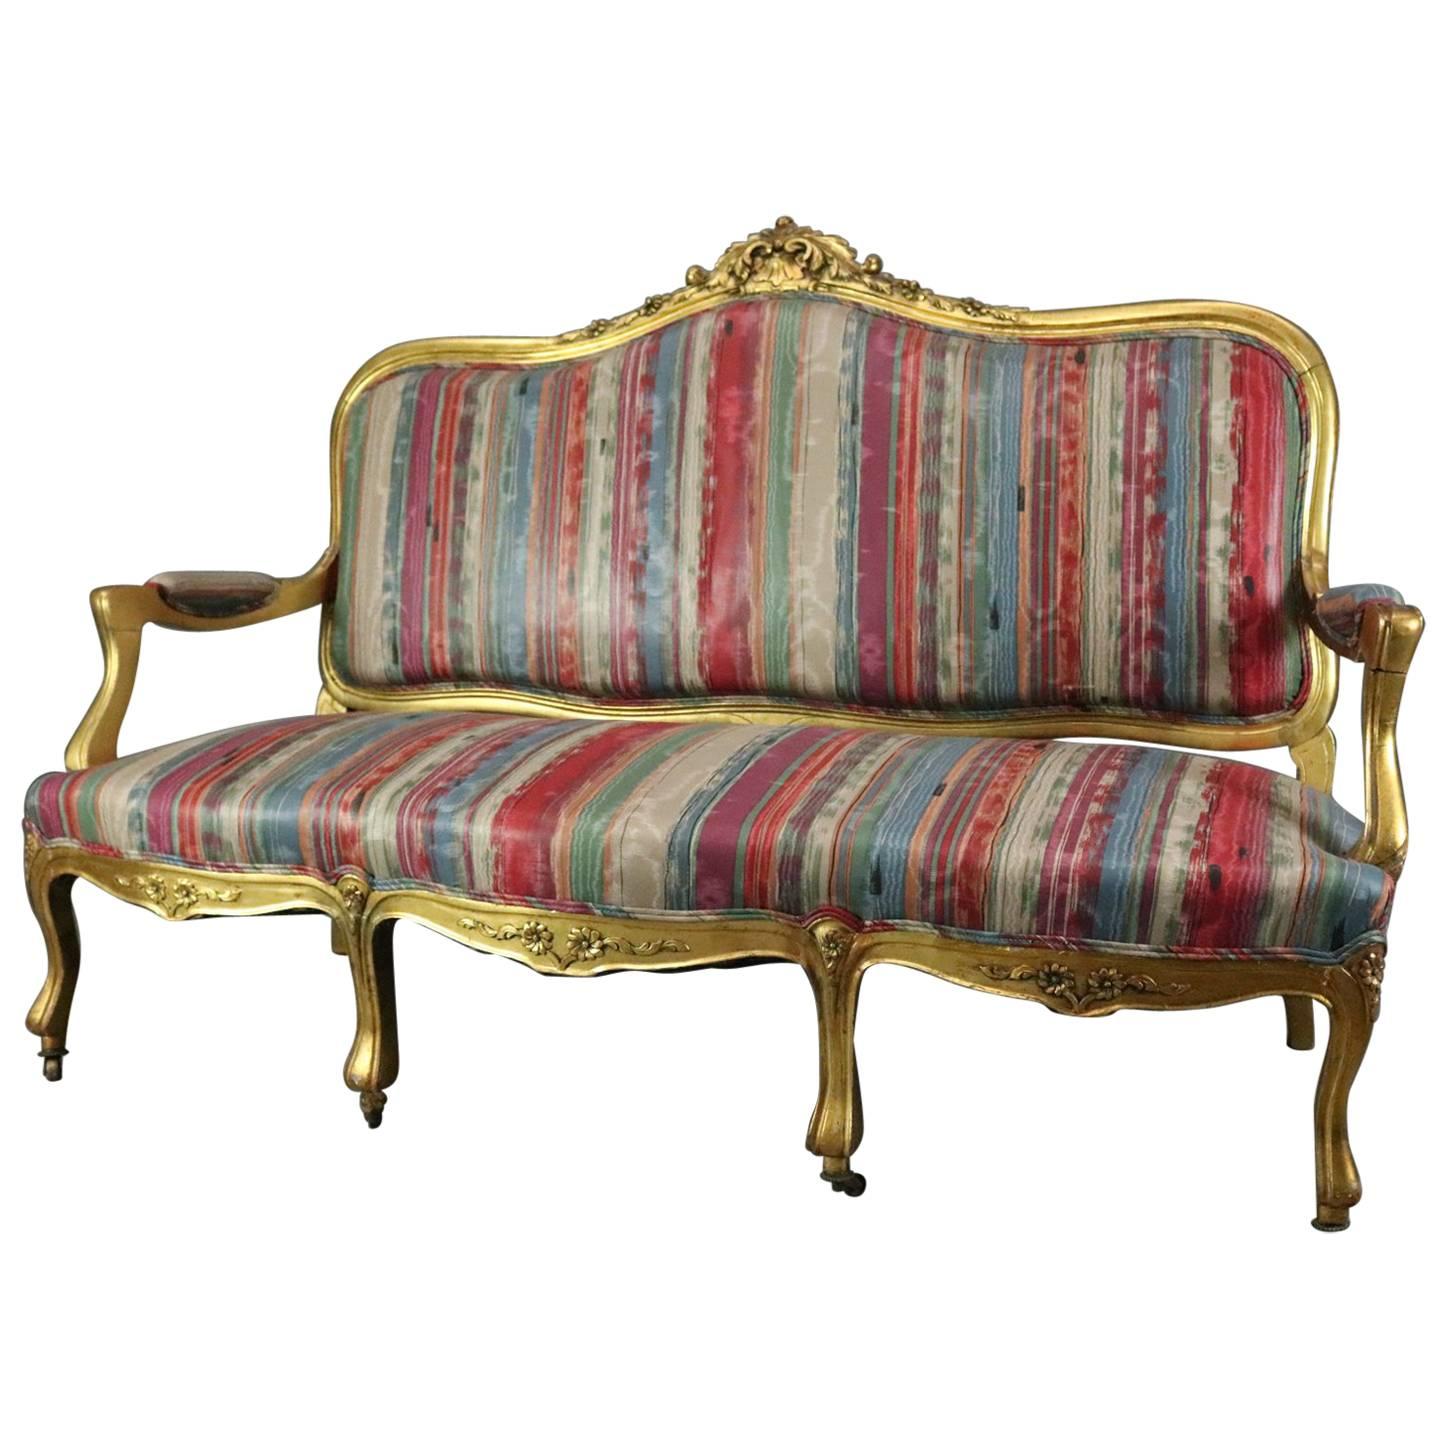 Antique French Louis XIV Style Carved Giltwood Upholstered Settee, circa 1870